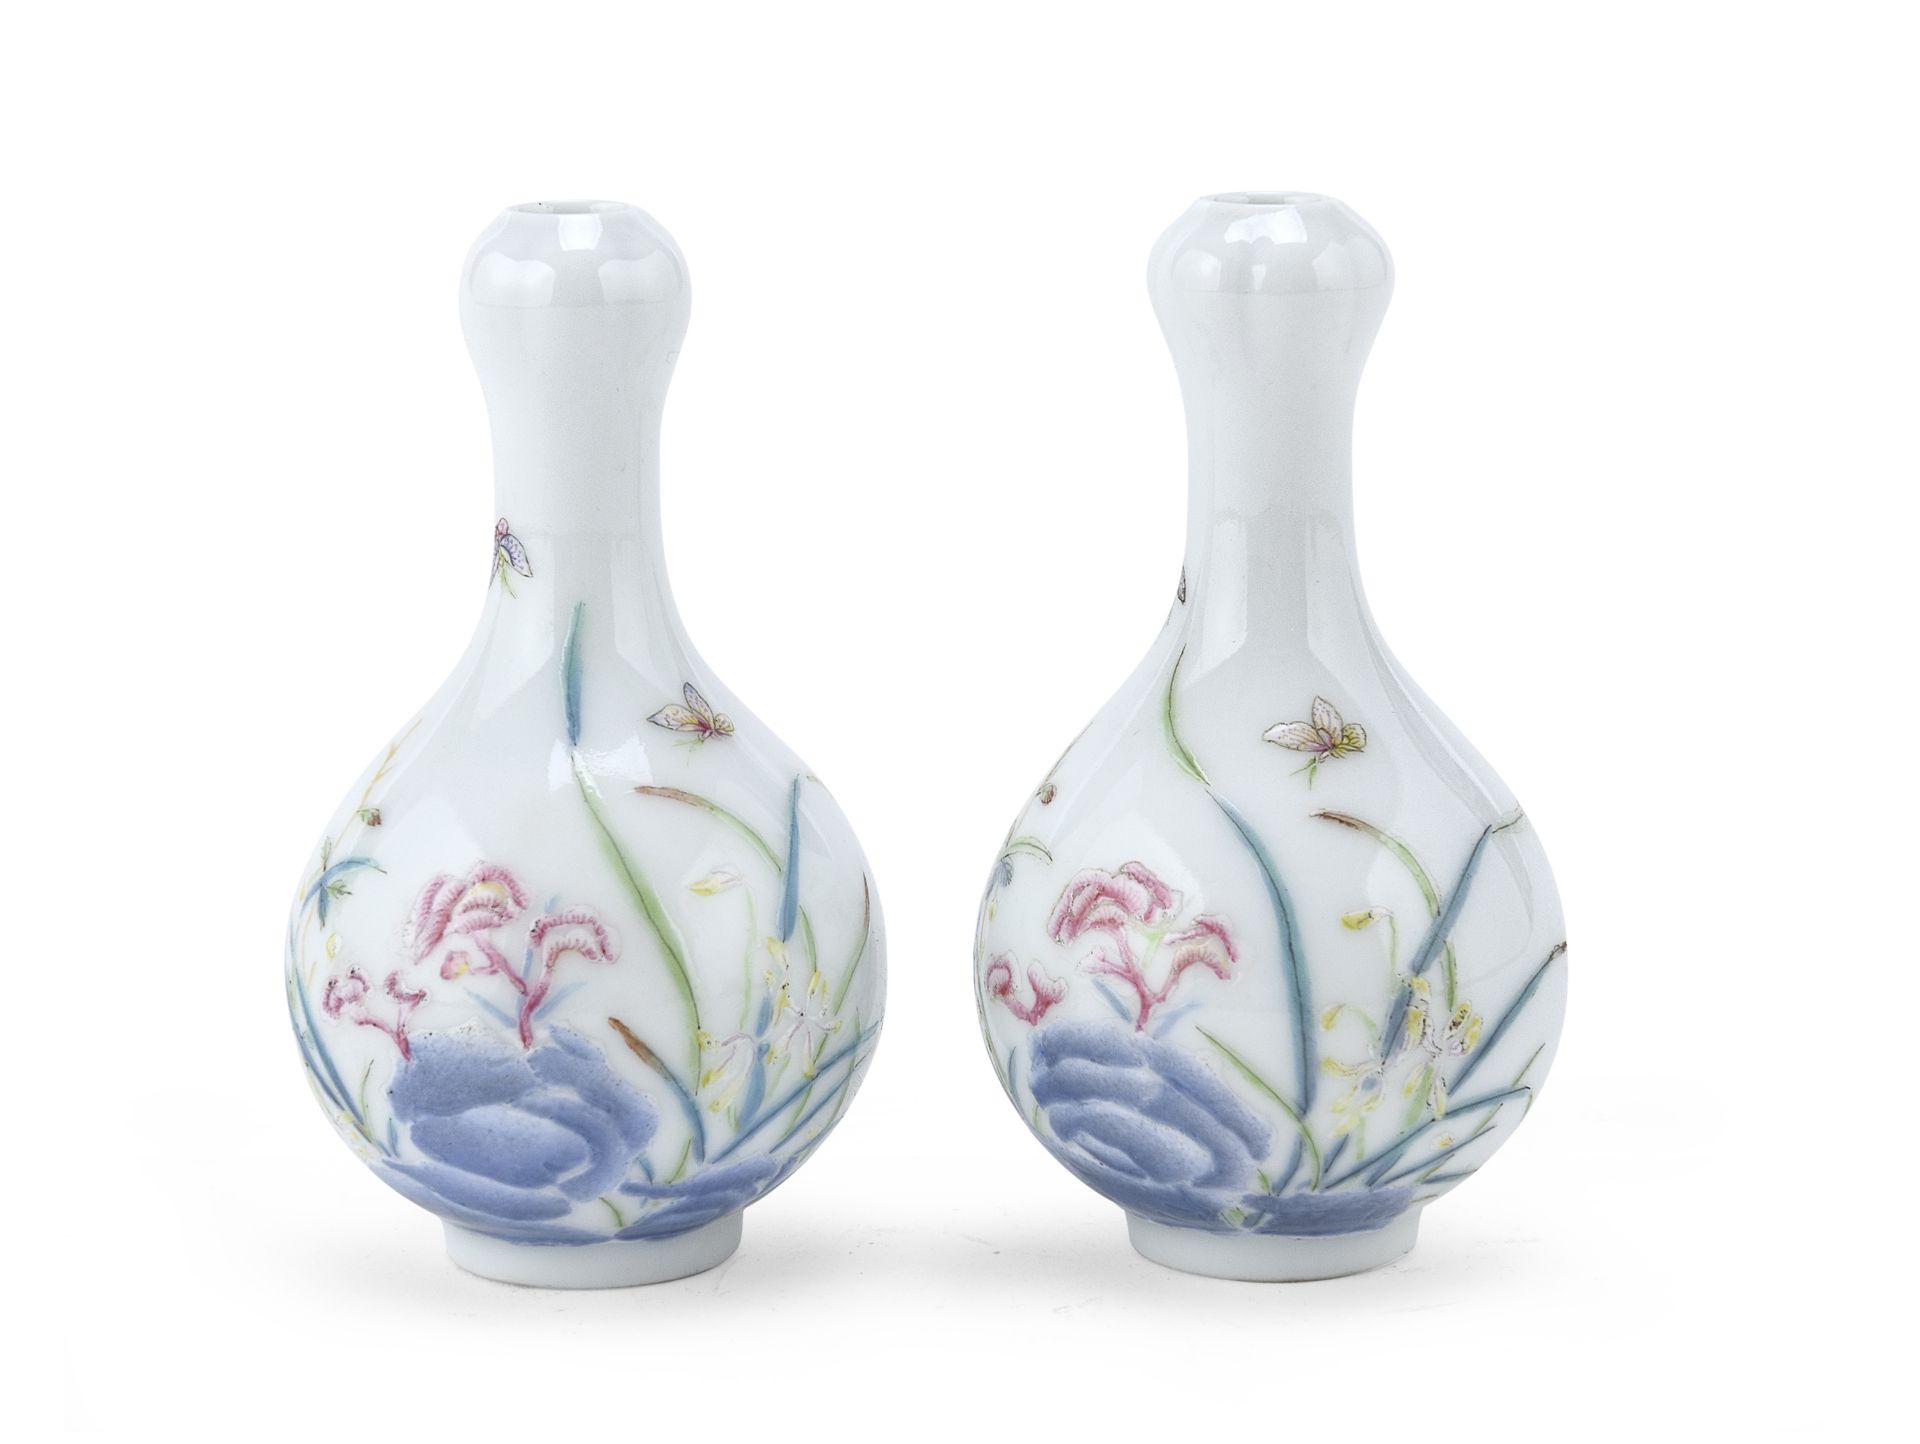 PAIR OF SMALL POLYCHROME ENAMELED PORCELAIN VASES CHINA 20TH CENTURY